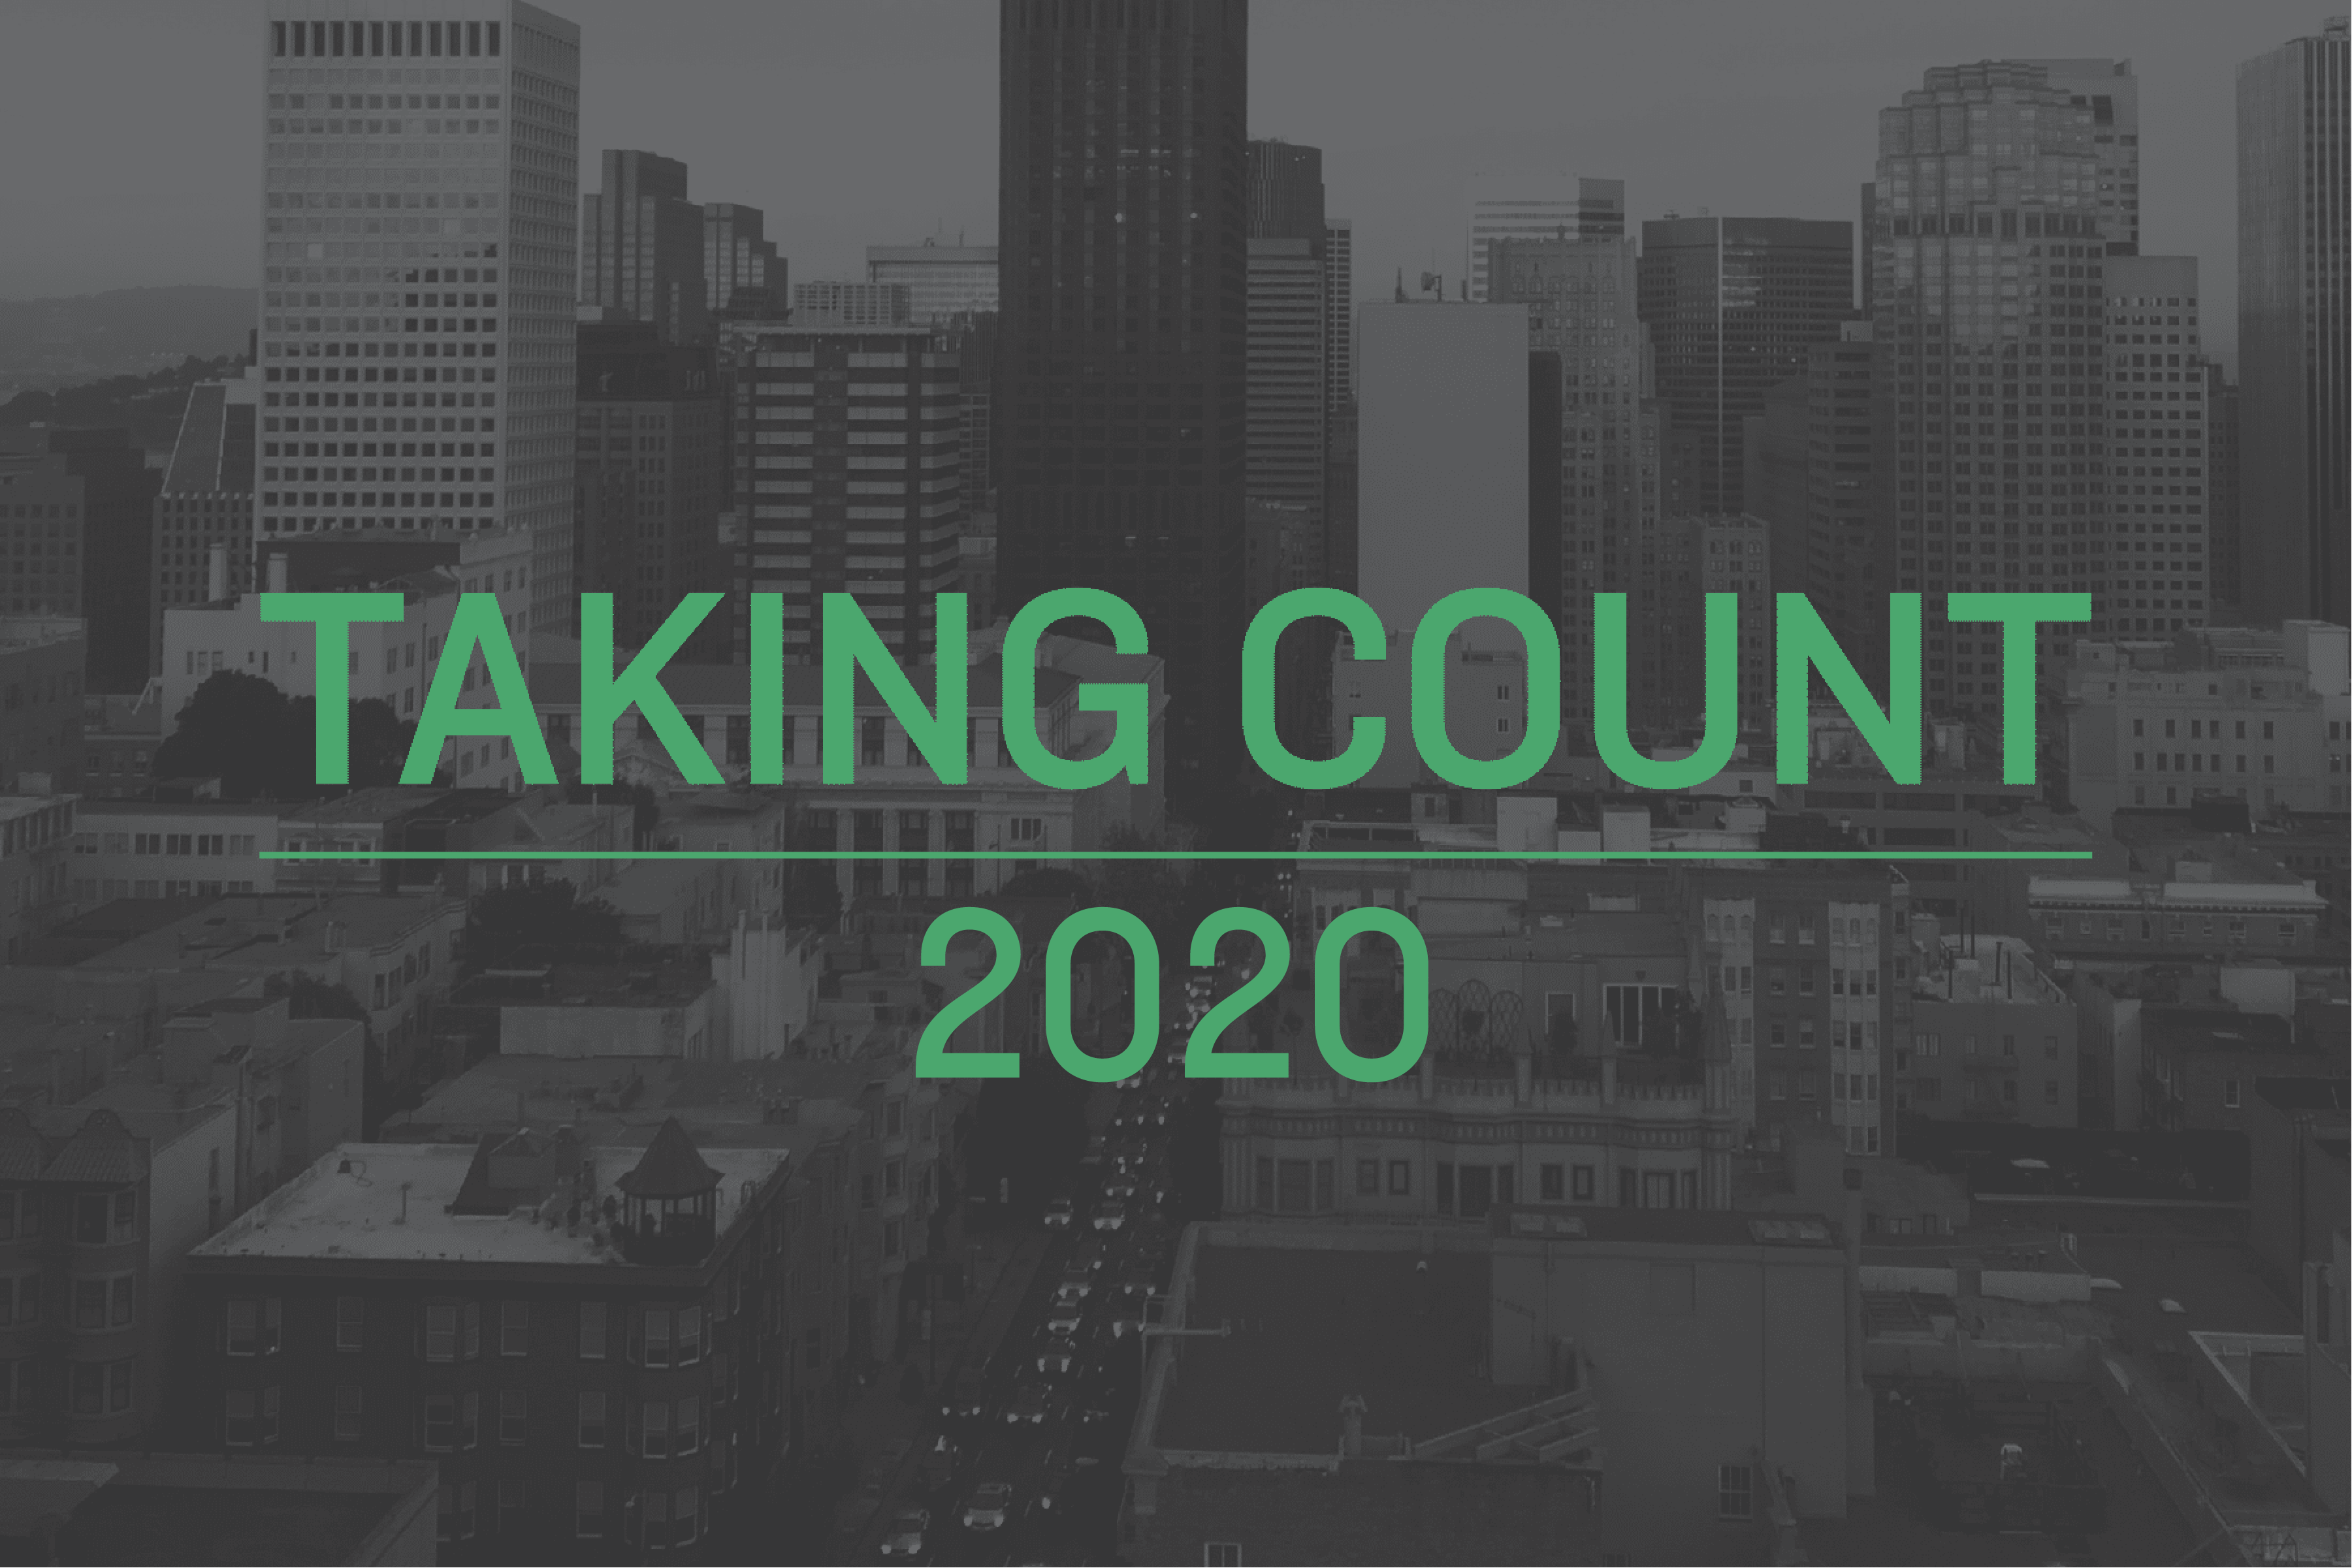 Taking Count 2020|50% of Bay Area residents can't pay their bills at least once during the year.|taking count graphic over a picture of San Francisco